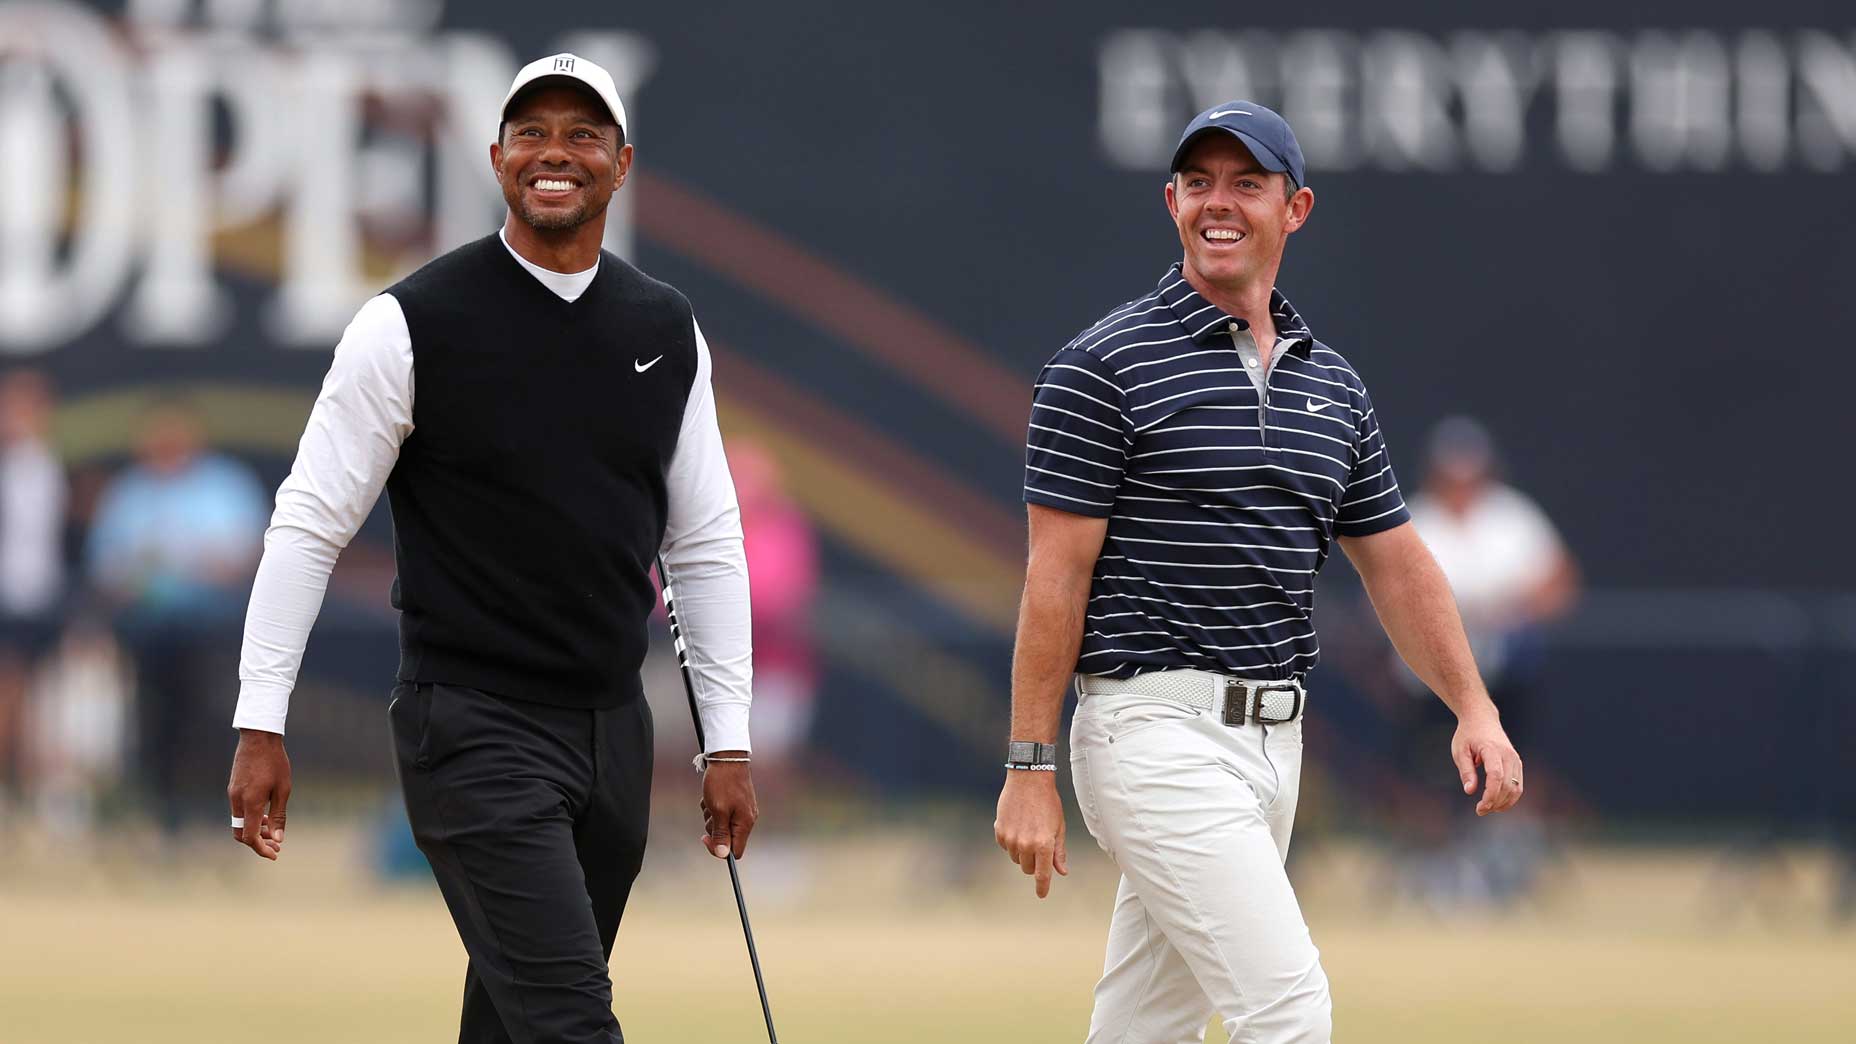 Tiger Woods and Rory McIlroy smile and walk course at St.  Andrews